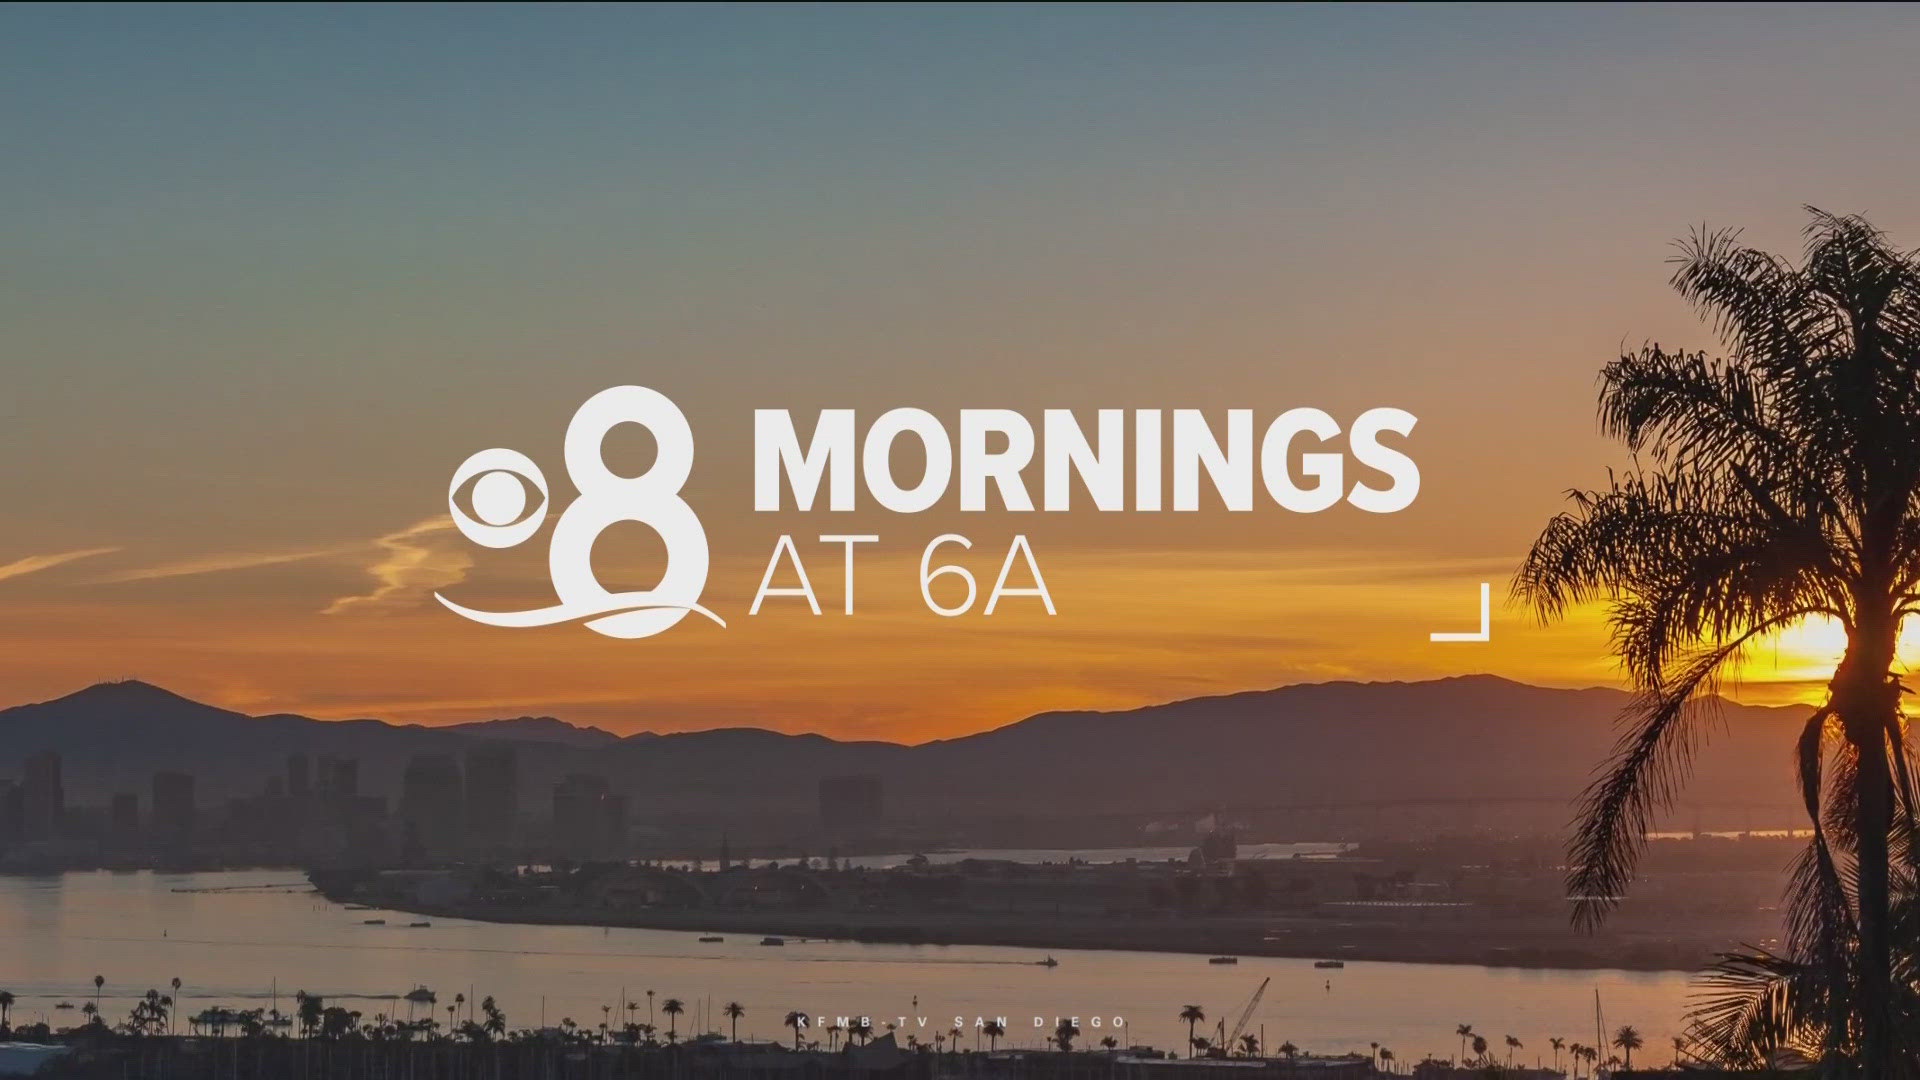 Here are the top stories around San Diego County for the morning of Wednesday, May 1.
For the latest news, weather and sports, head to:
https://www.cbs8.com/